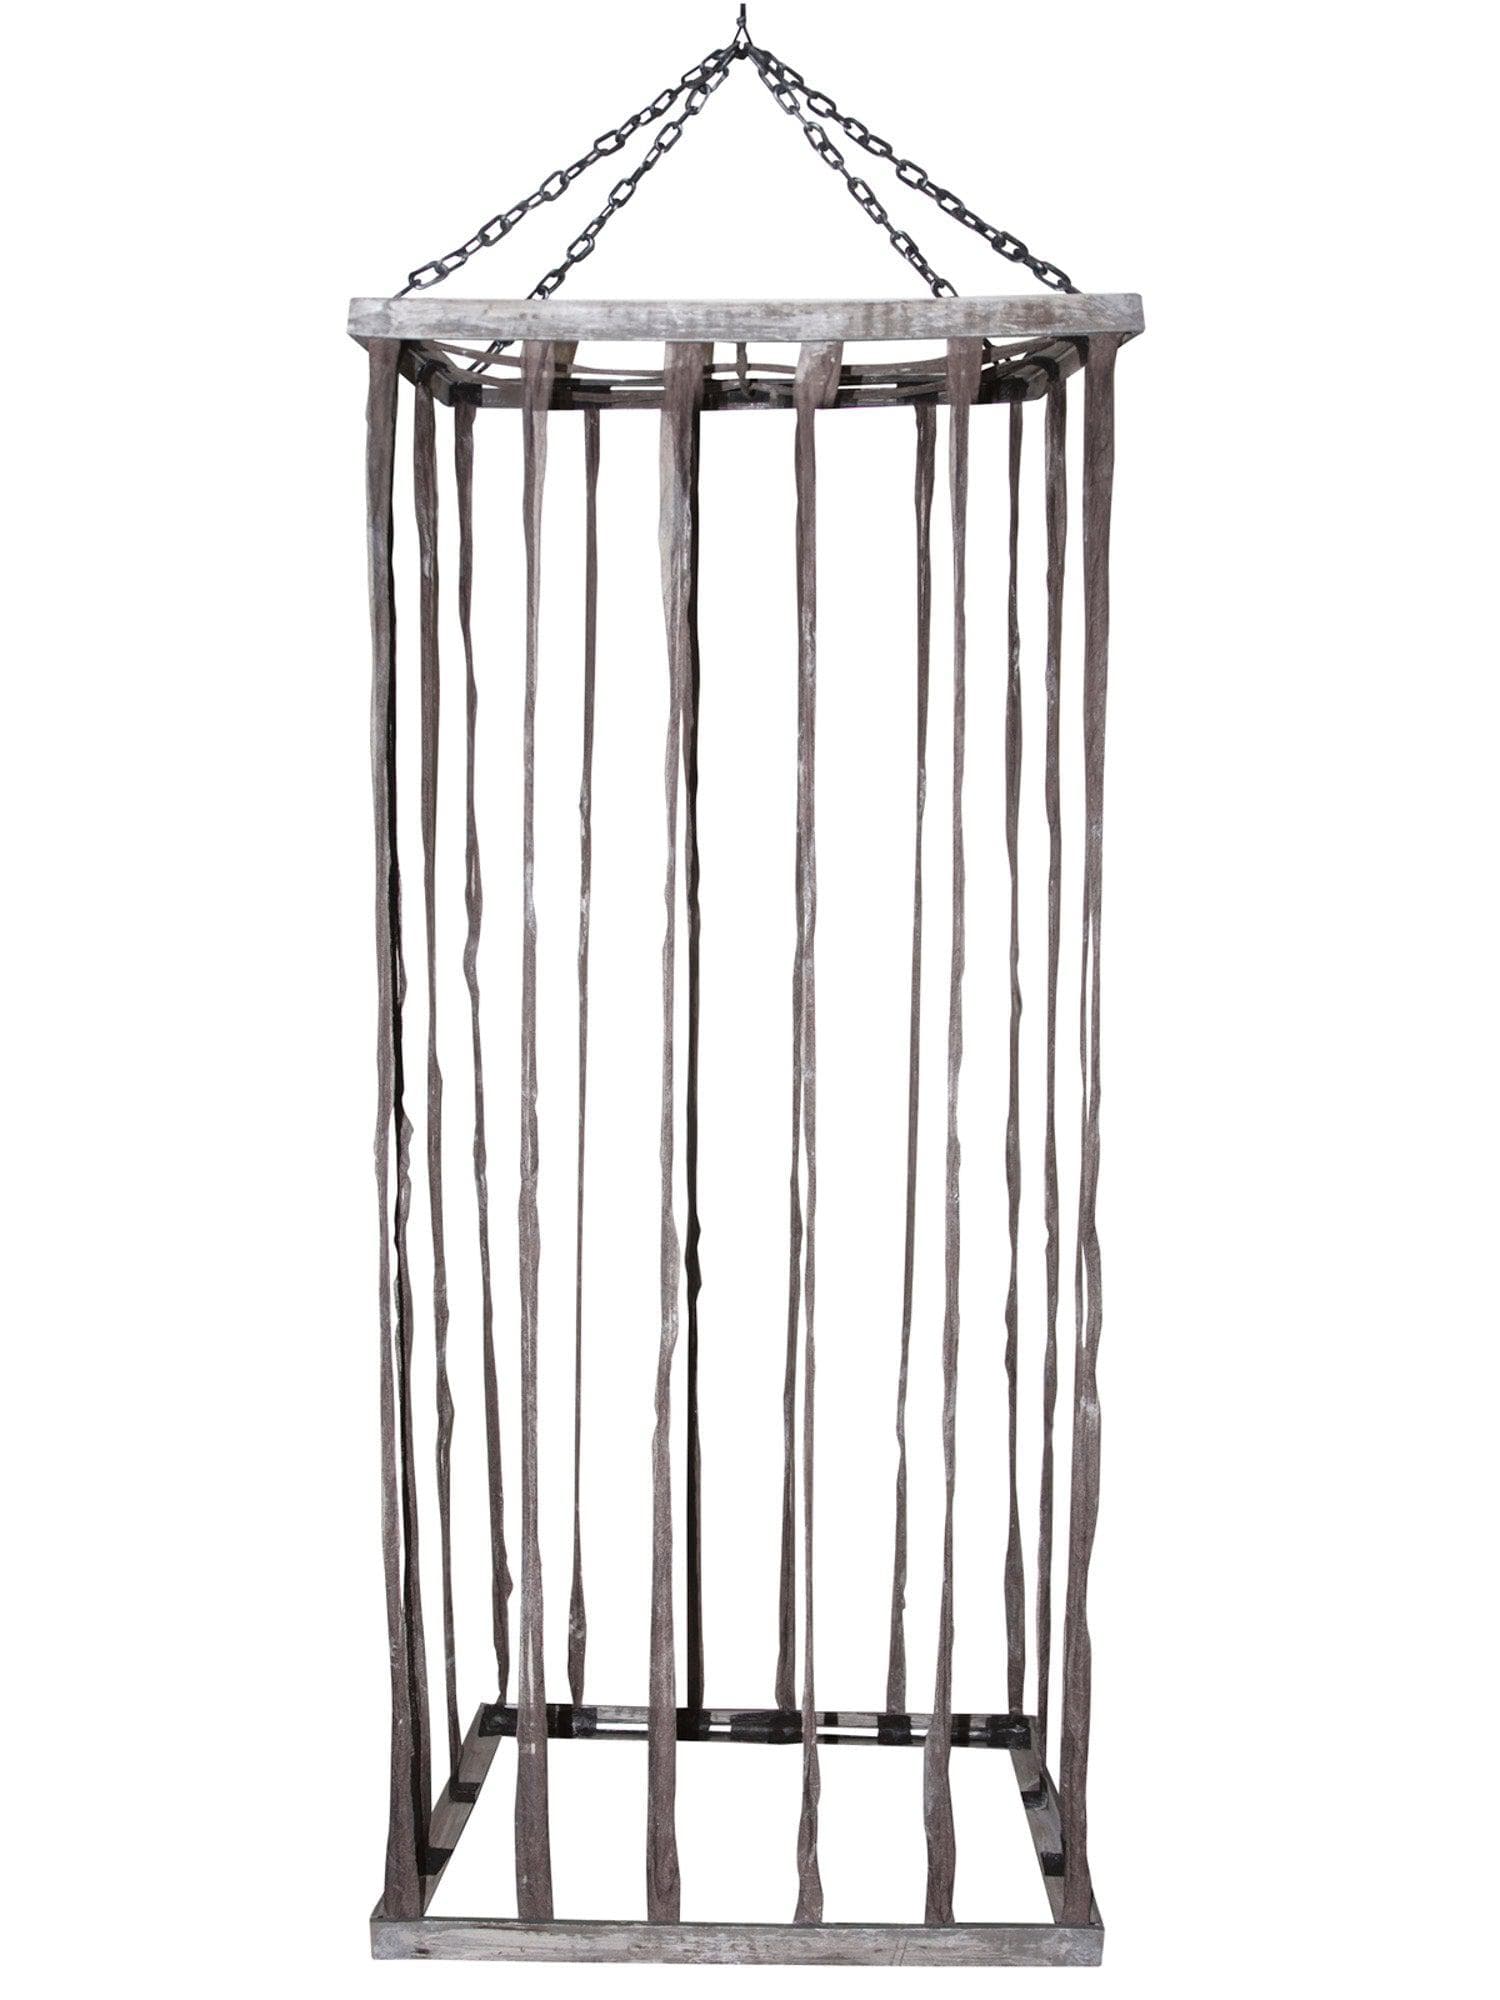 6.5 Foot Lifesize Cage Hanging Prop - costumes.com